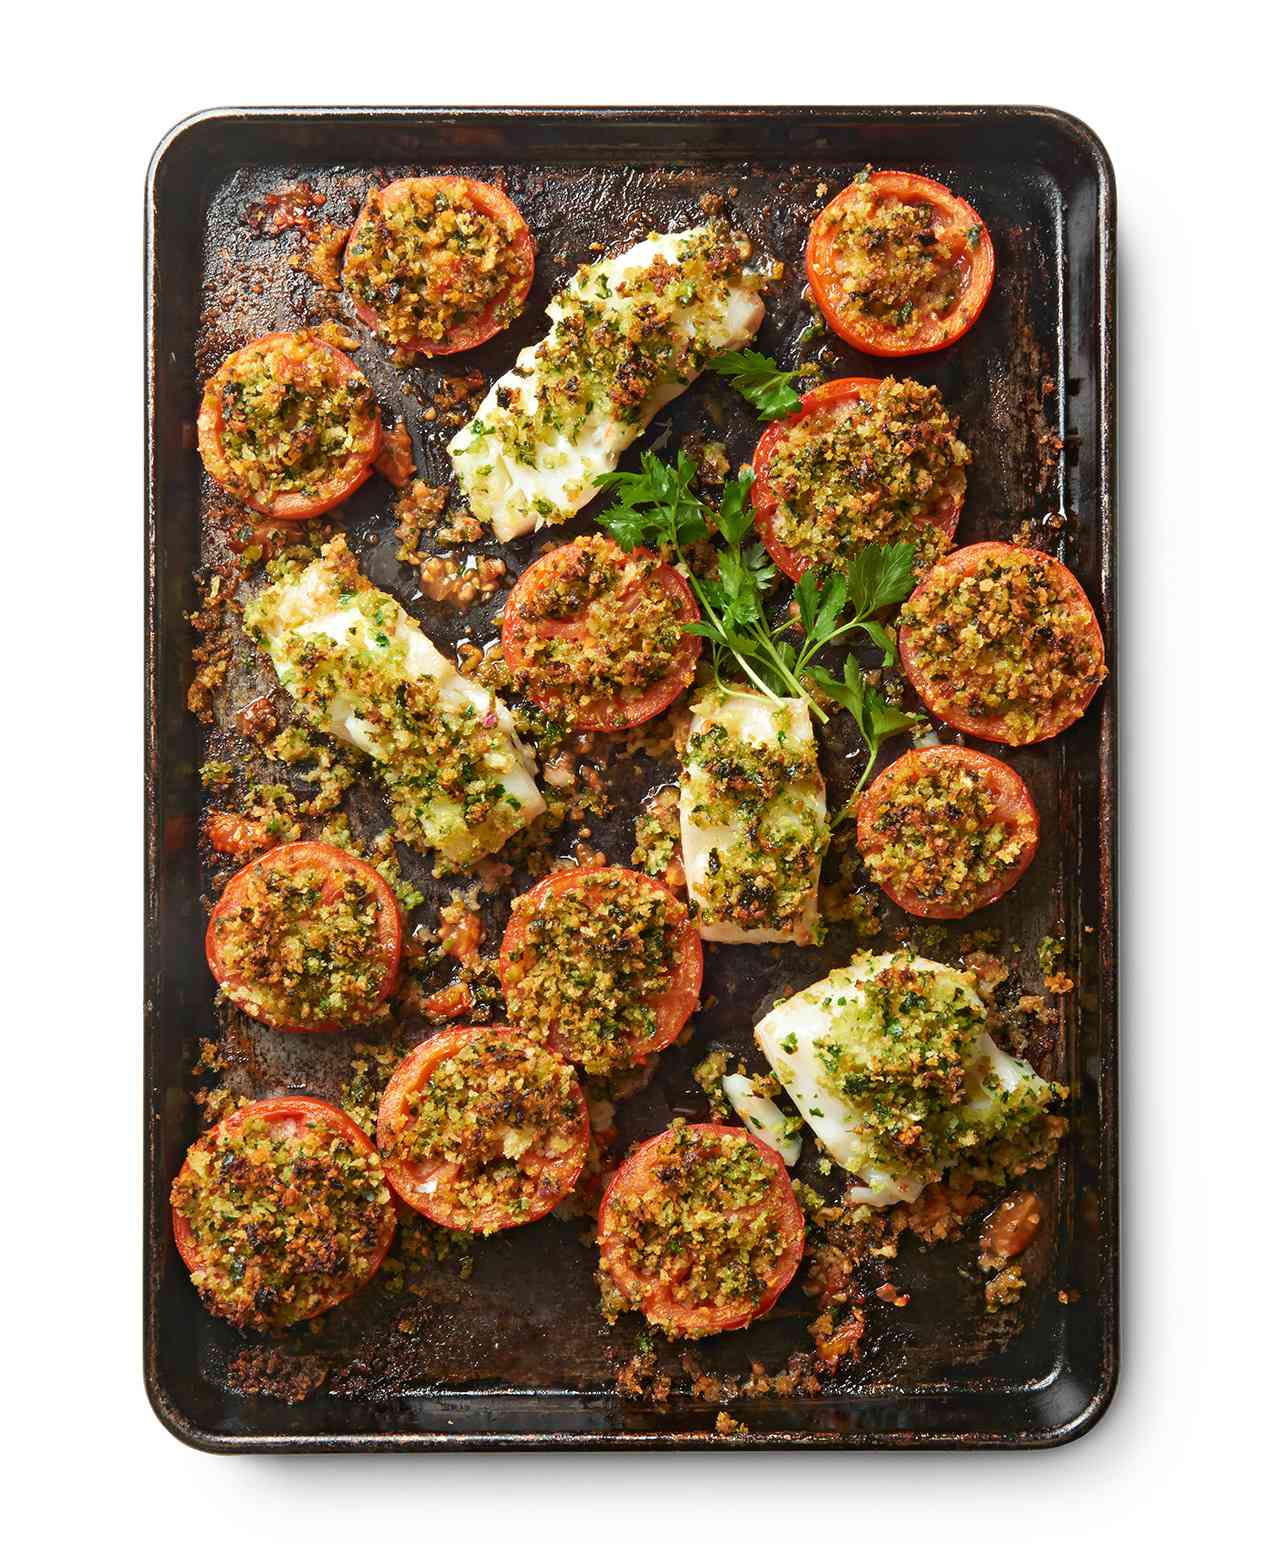 Cod and Tomatoes with Crispy Parsley Crumbs